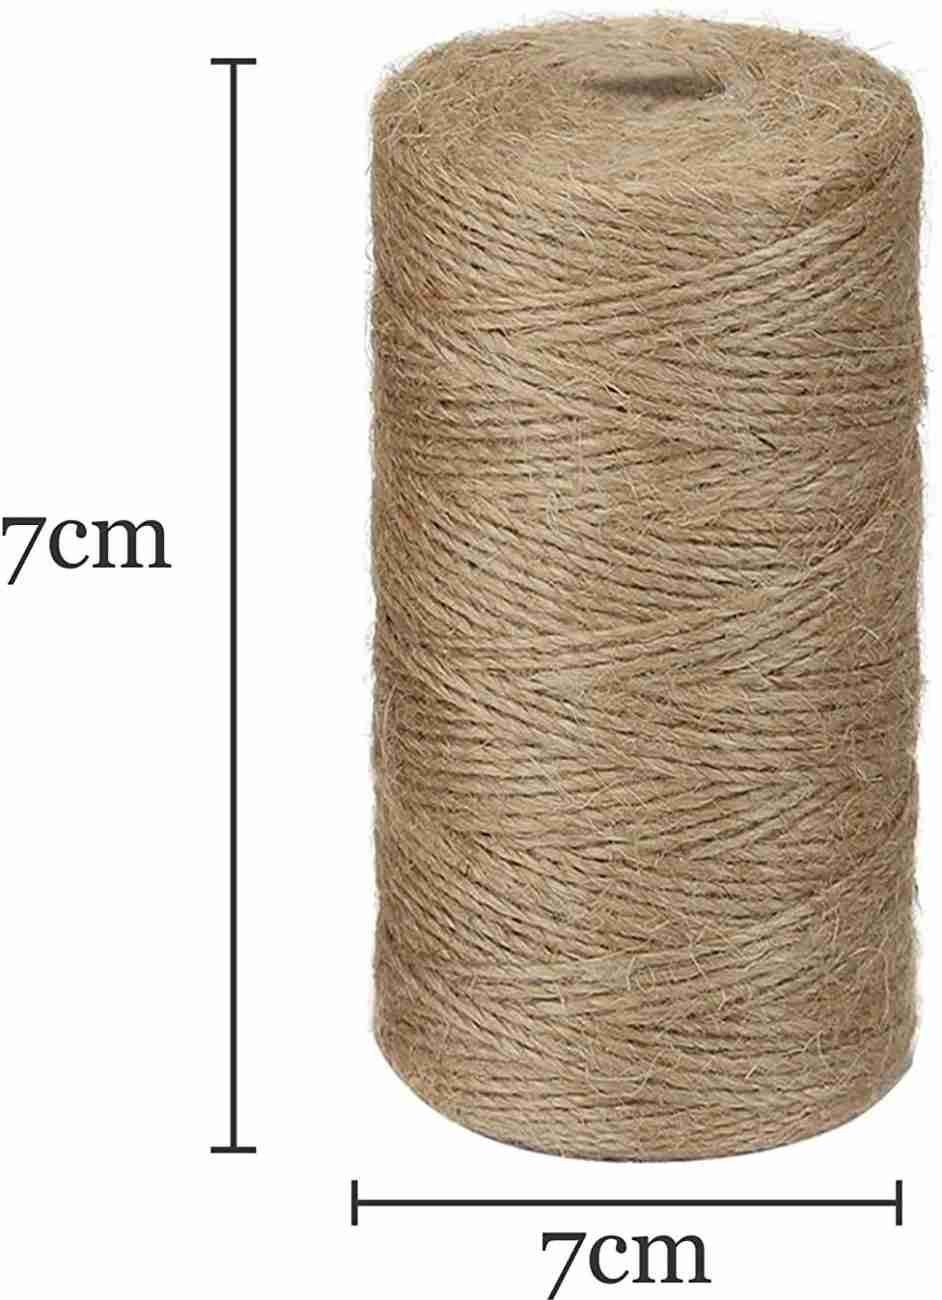 GIFTI SKY Jute Twine Threads, String Rope 120 Meters 2ply 2mm Thick Brown  Color for Crafts - Jute Twine Threads, String Rope 120 Meters 2ply 2mm Thick  Brown Color for Crafts .